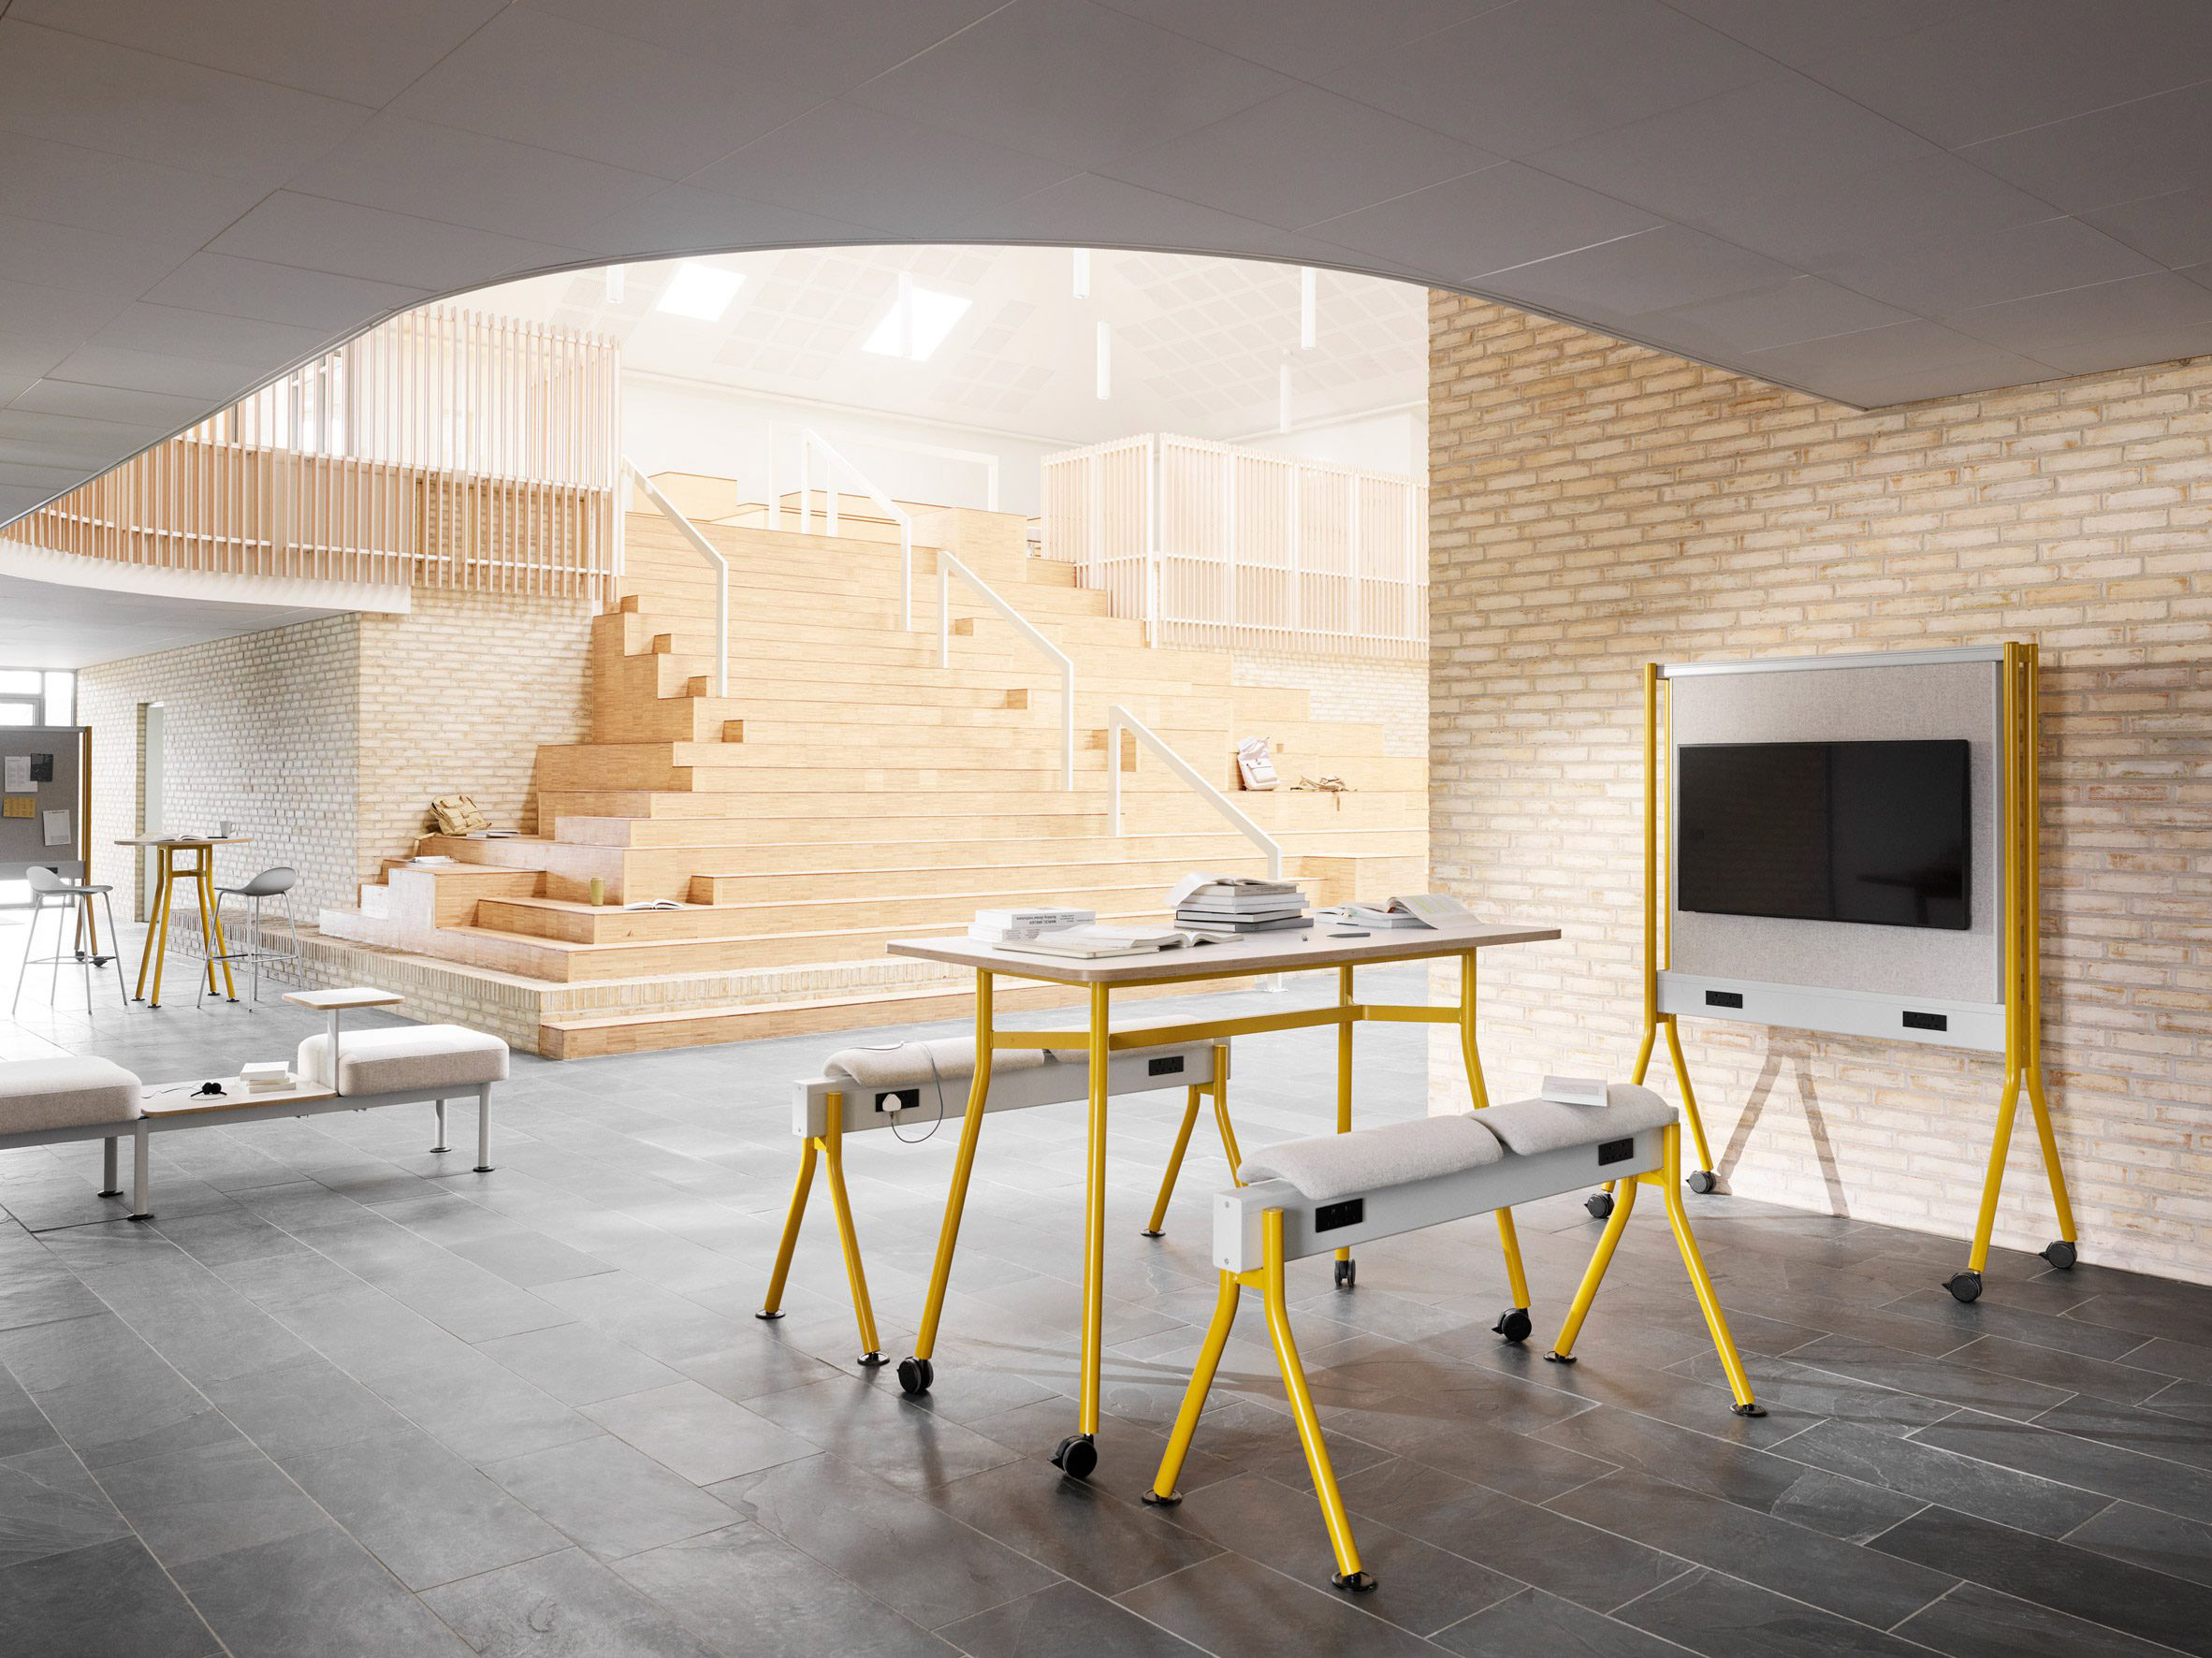 CoLab furniture collection situated in a classroom environment